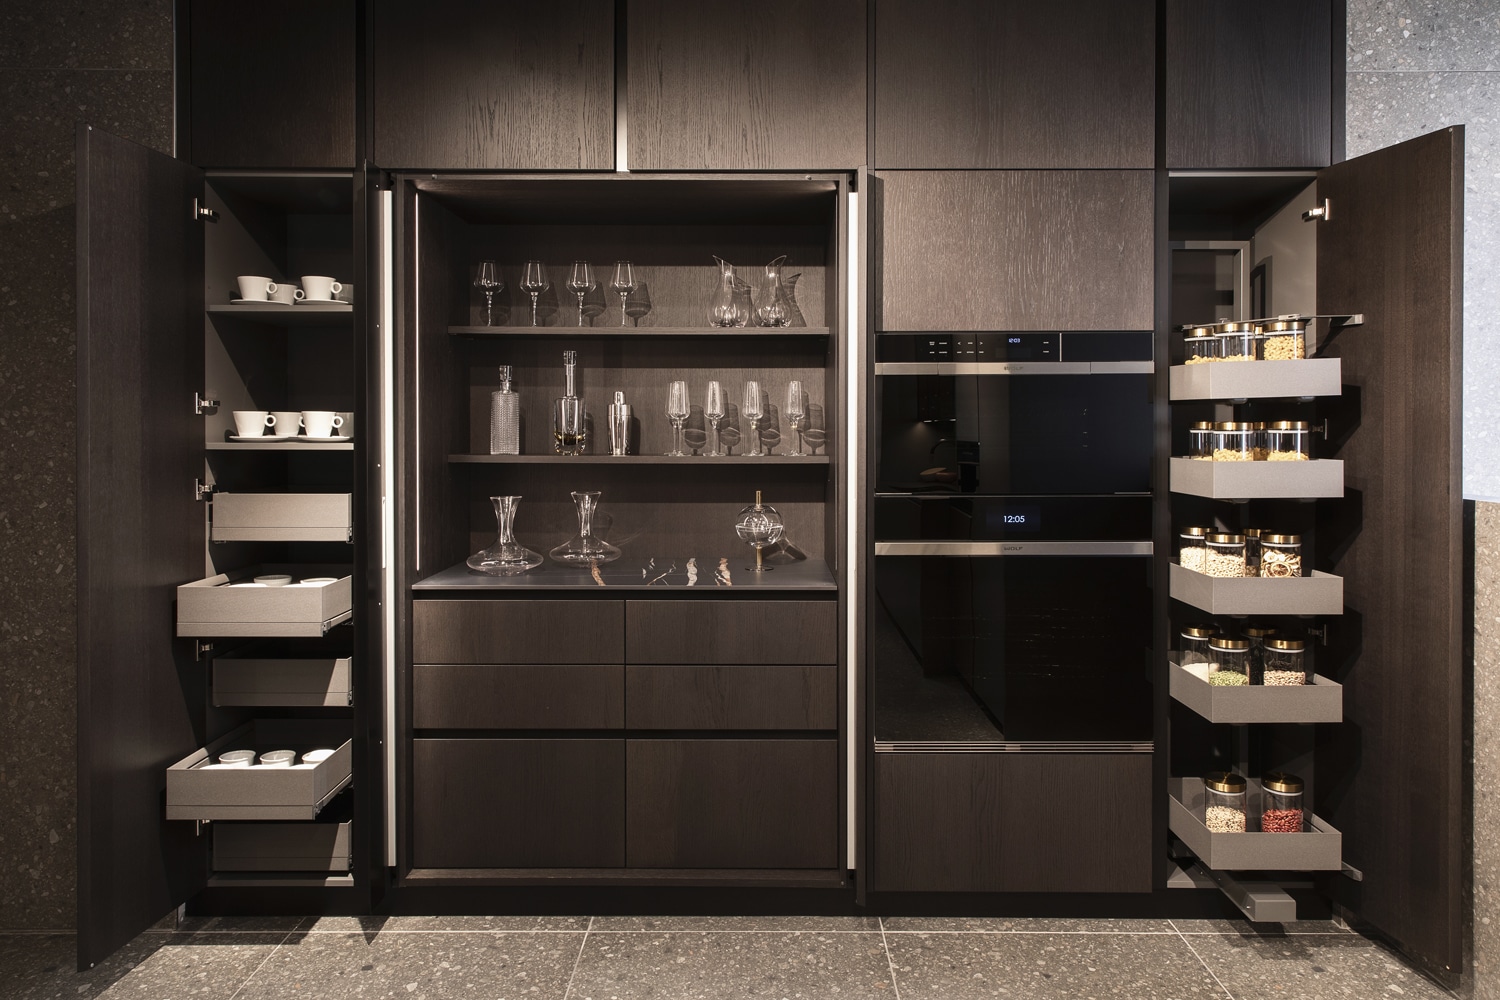 Pantry cabinets in Station wood with Wing pocket doors and full extraction storage baskets.